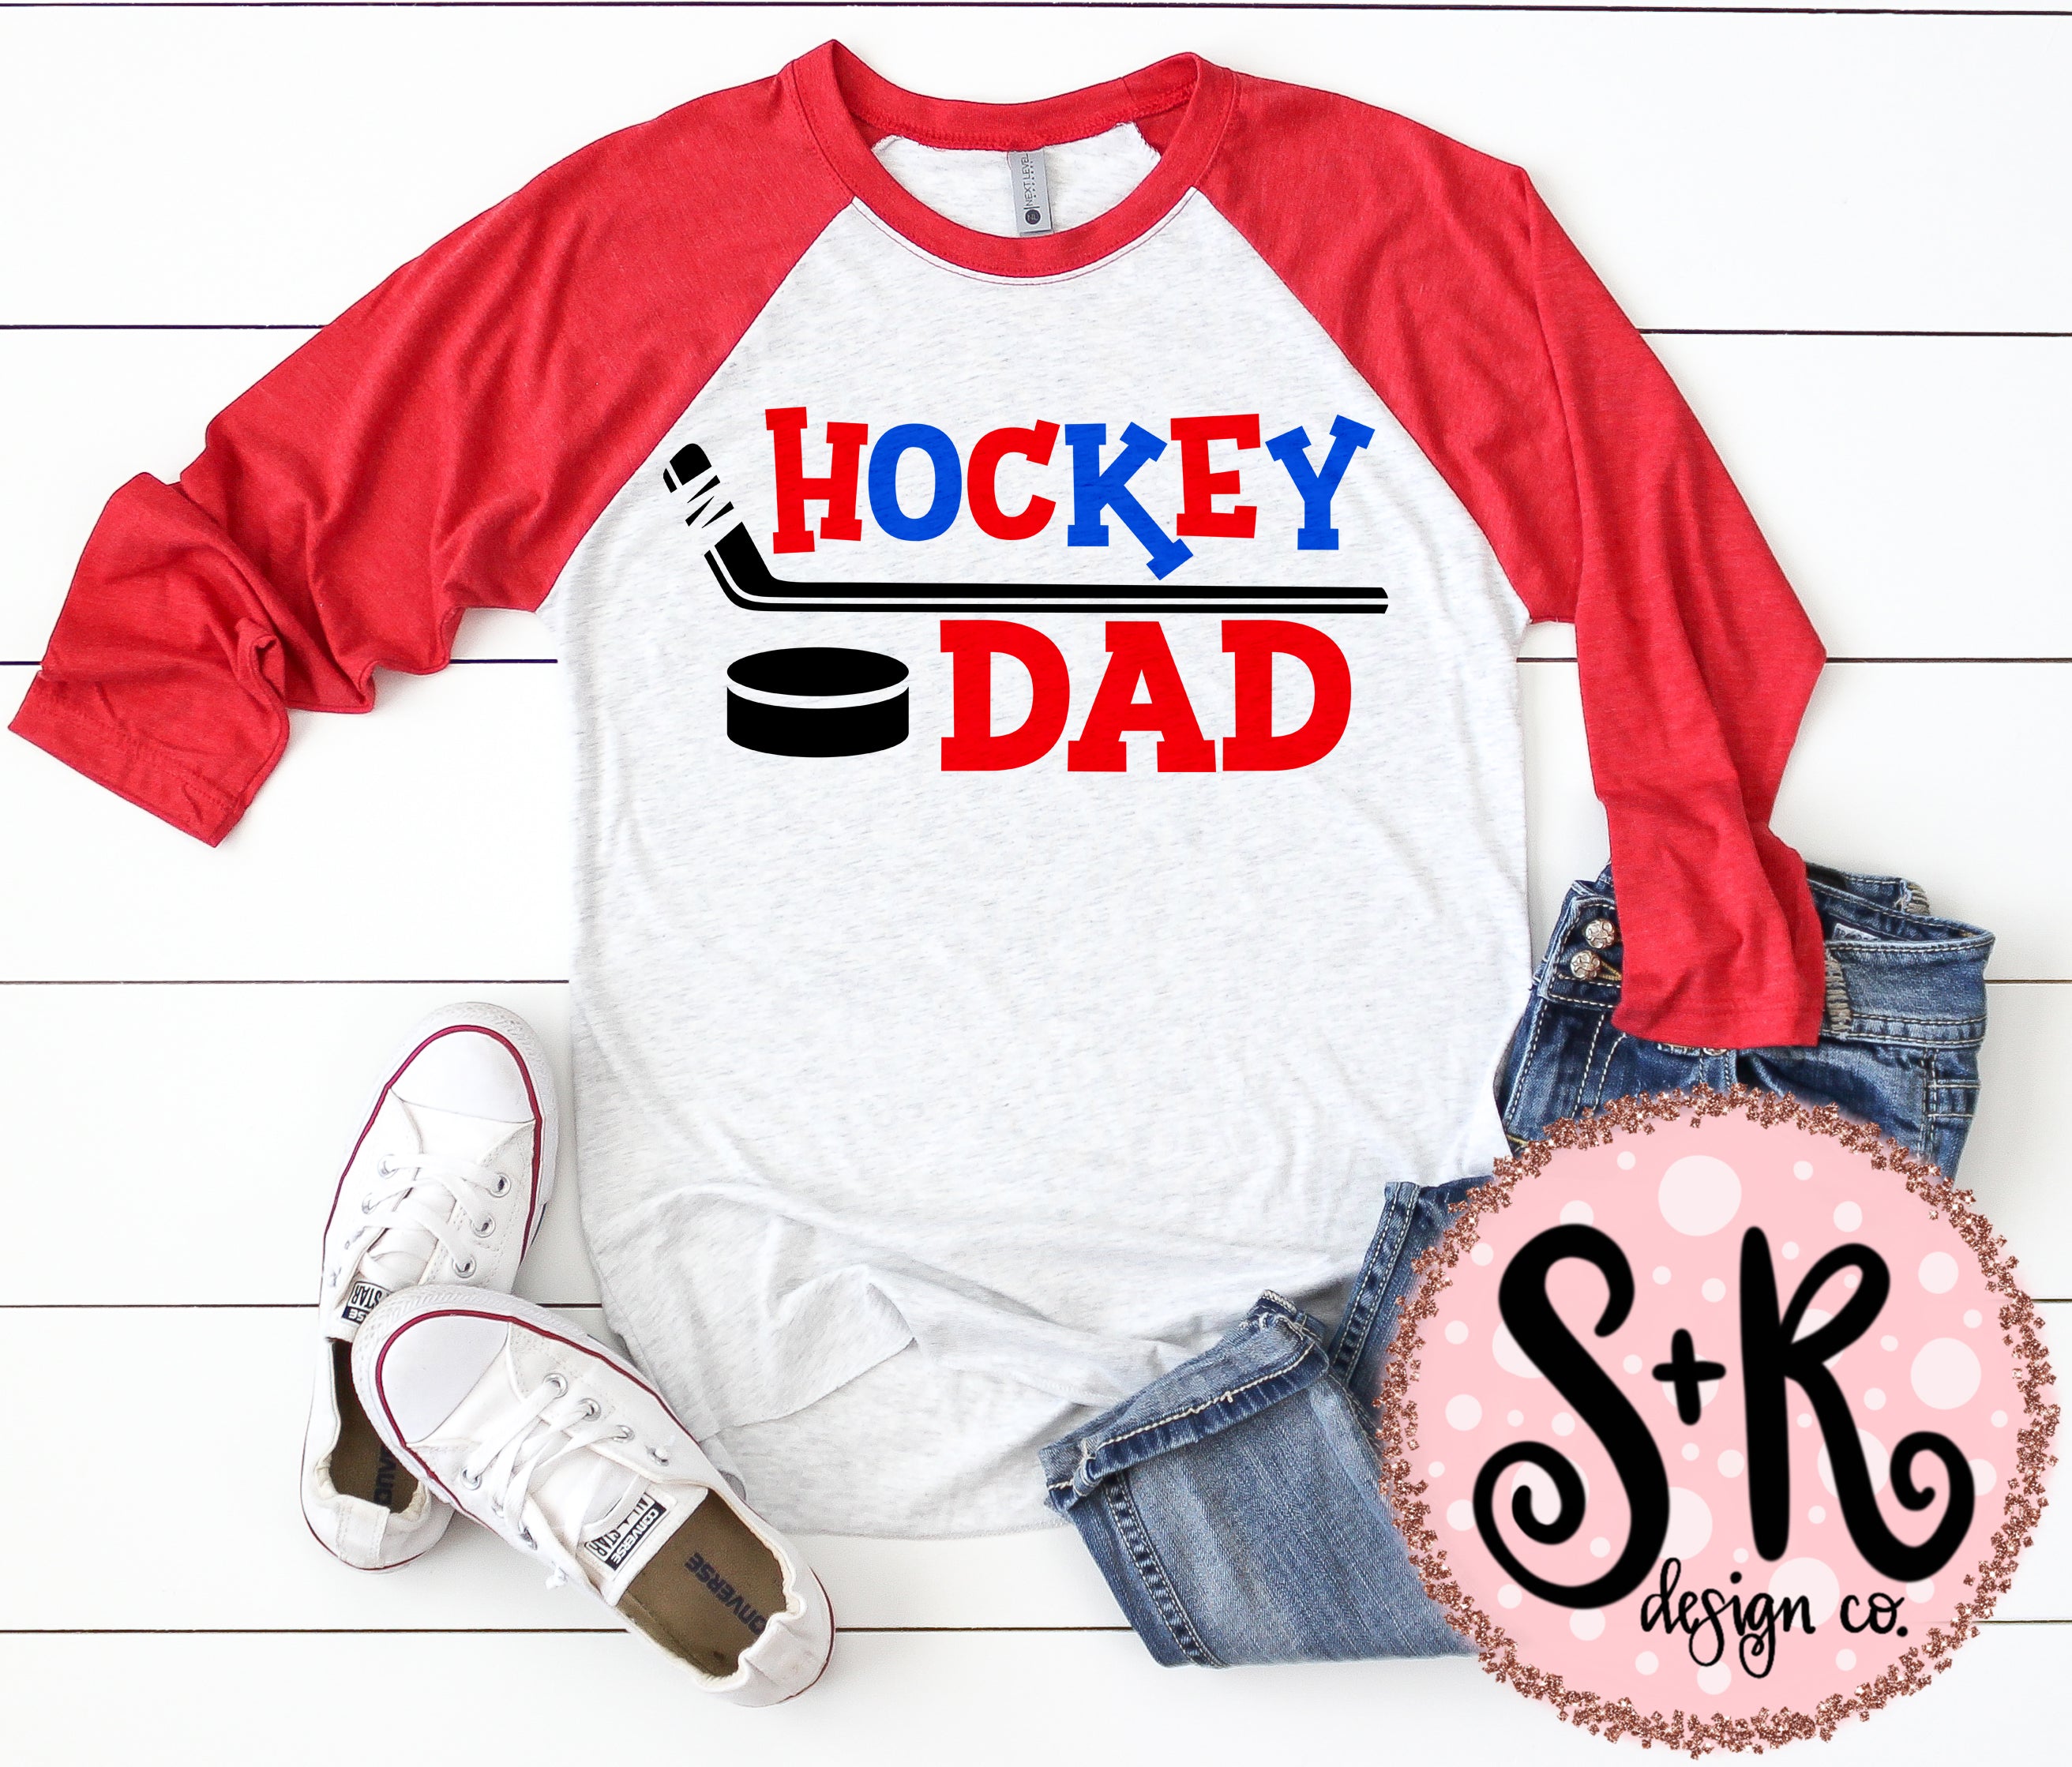 Download Hockey Dad Svg Dxf Png 2019 Scout And Rose Design Co